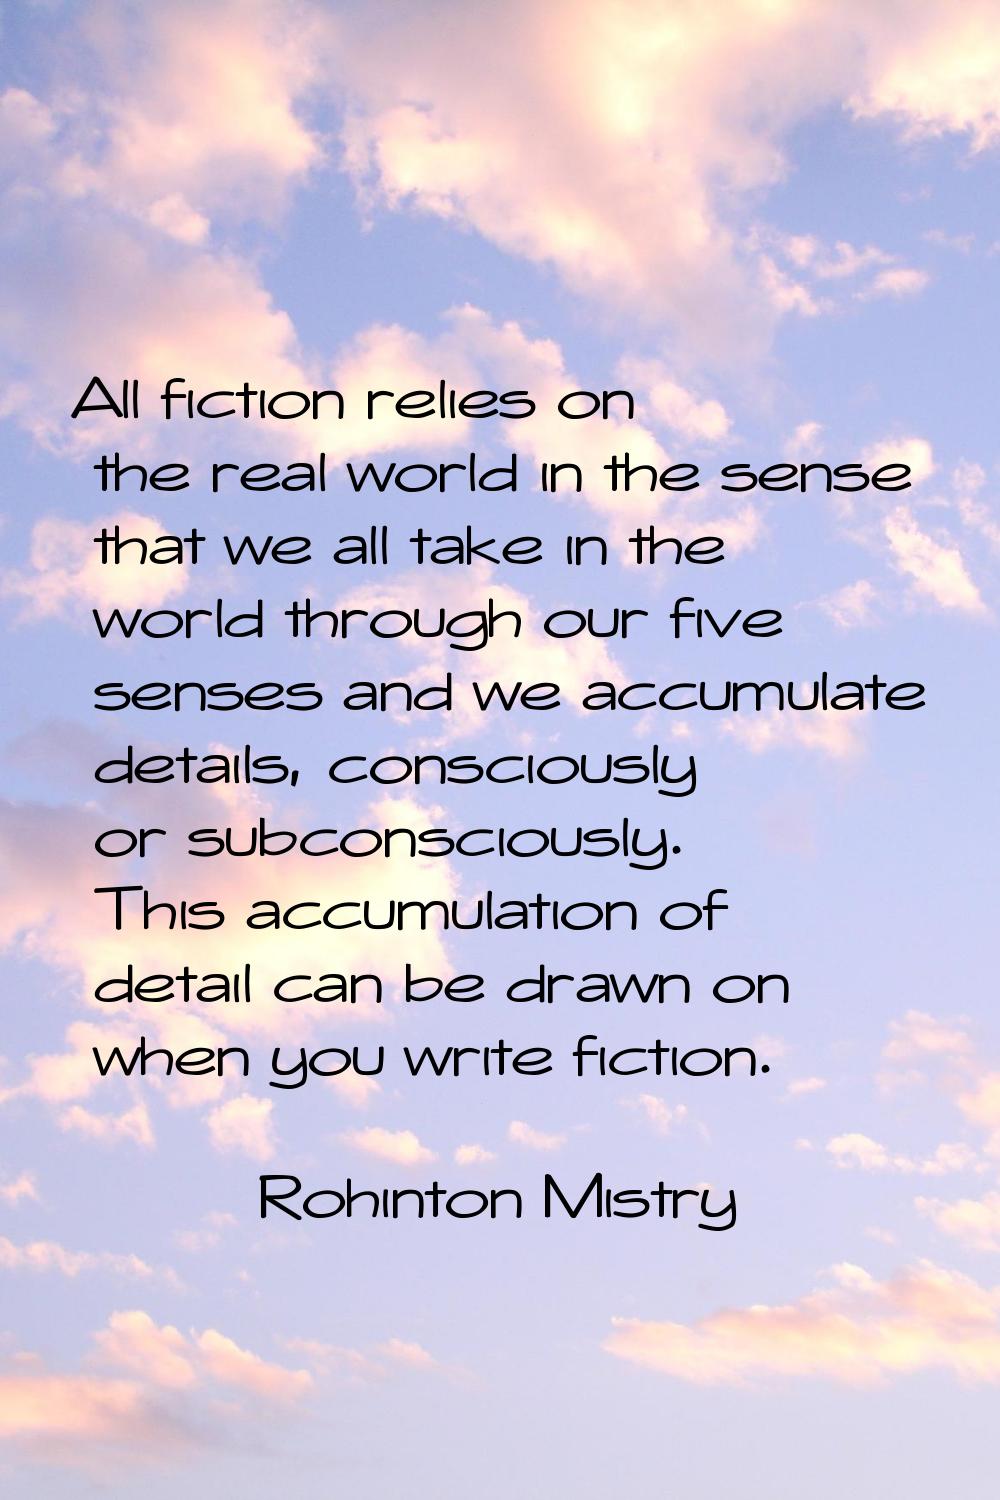 All fiction relies on the real world in the sense that we all take in the world through our five se